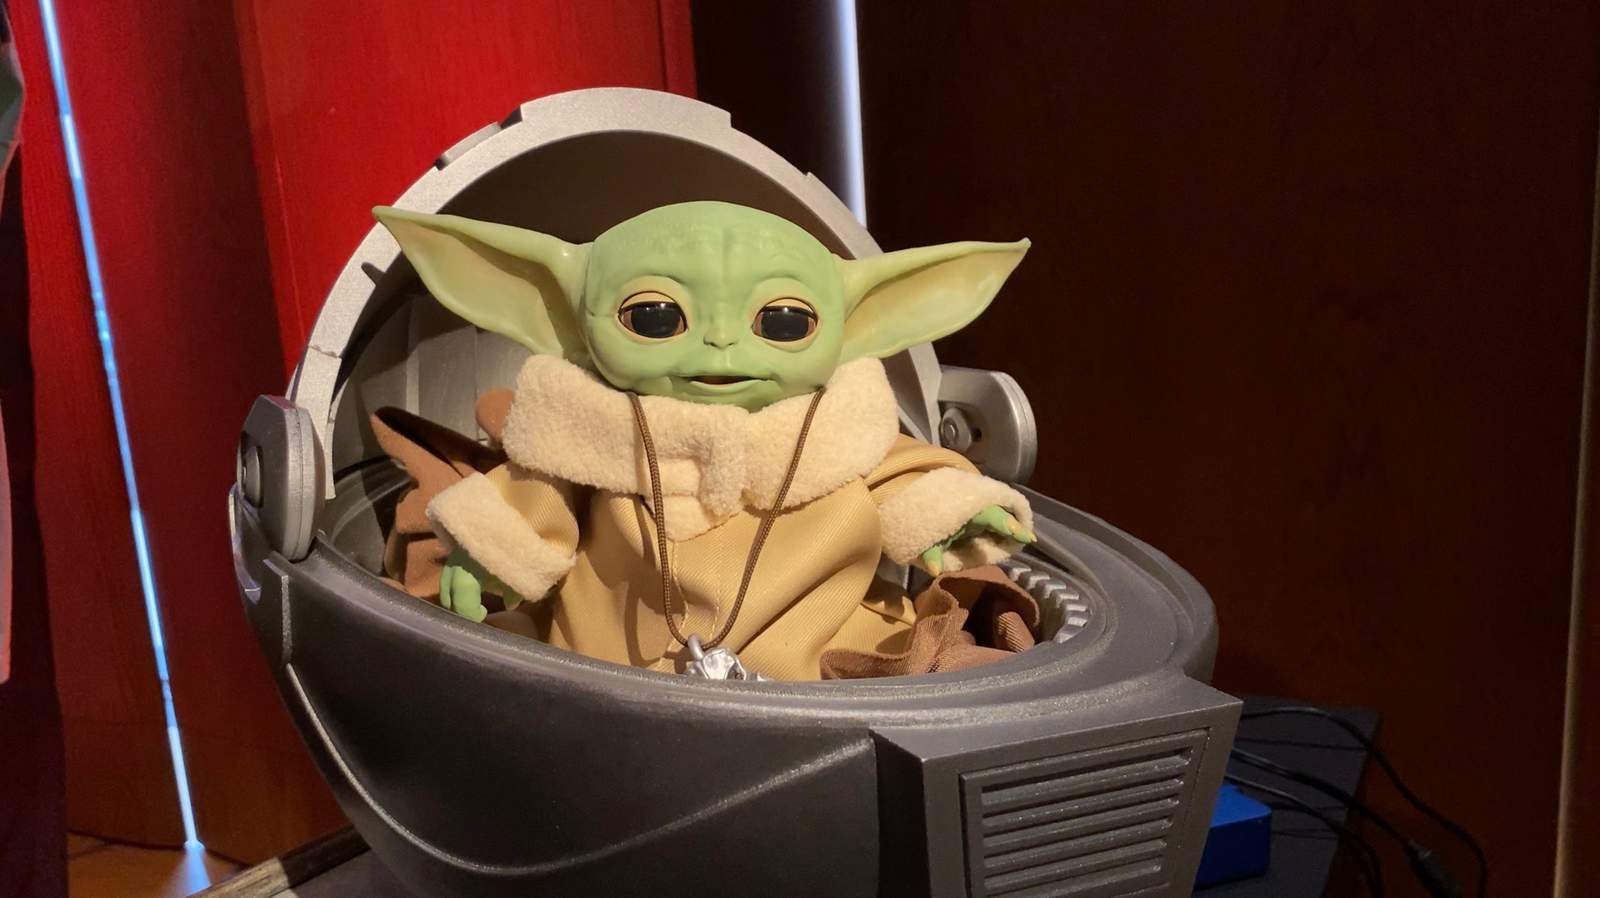 Baby Yoda toy production could be derailed by coronavirus